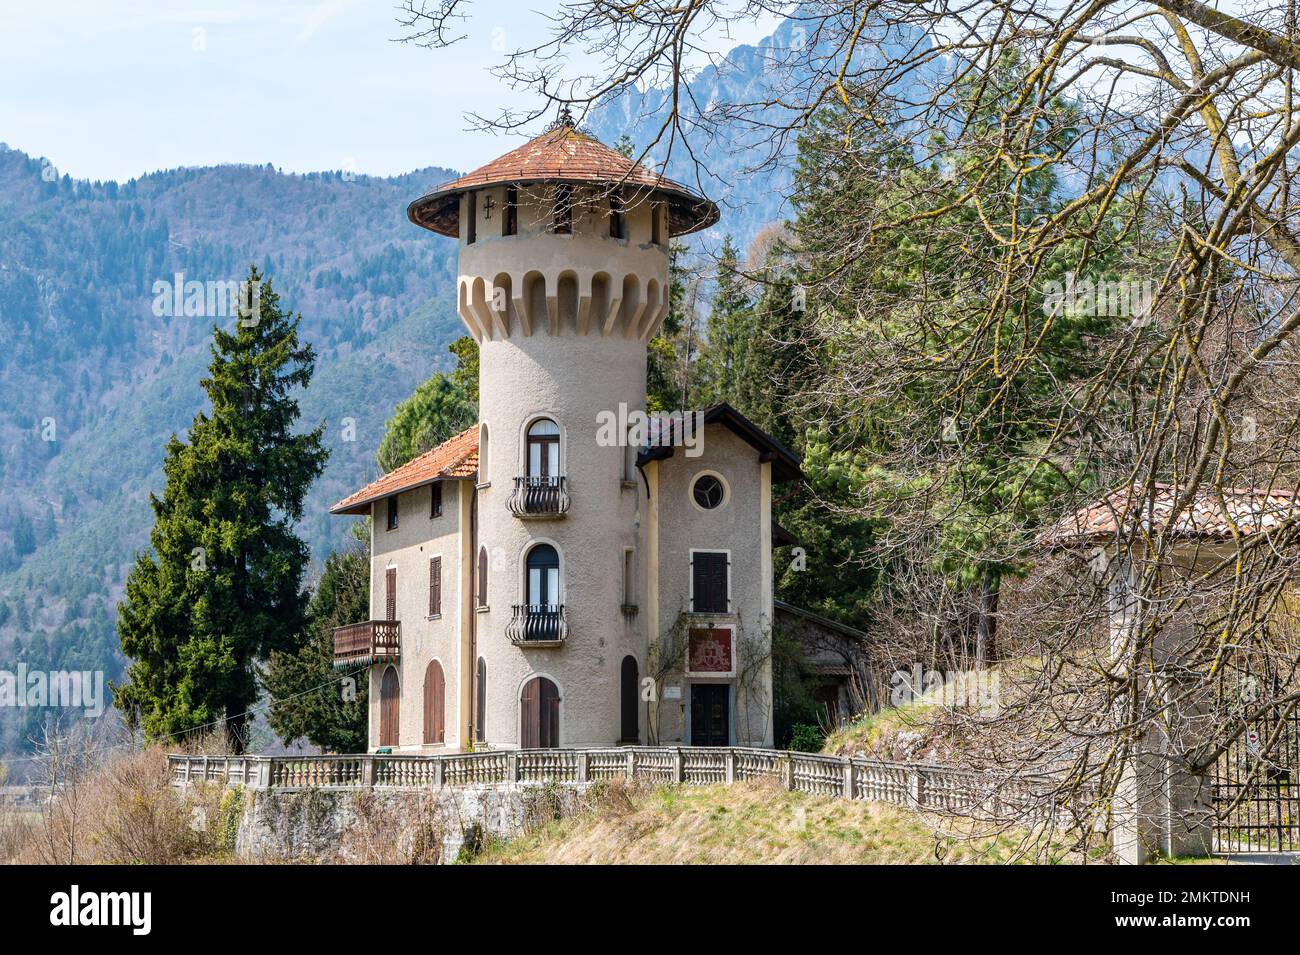 The Villa Dianella is 'the castle', historic home from the 900, in a privileged position overlooking the lake of Ledro - Mezzolago, Trento, Trentino A Stock Photo